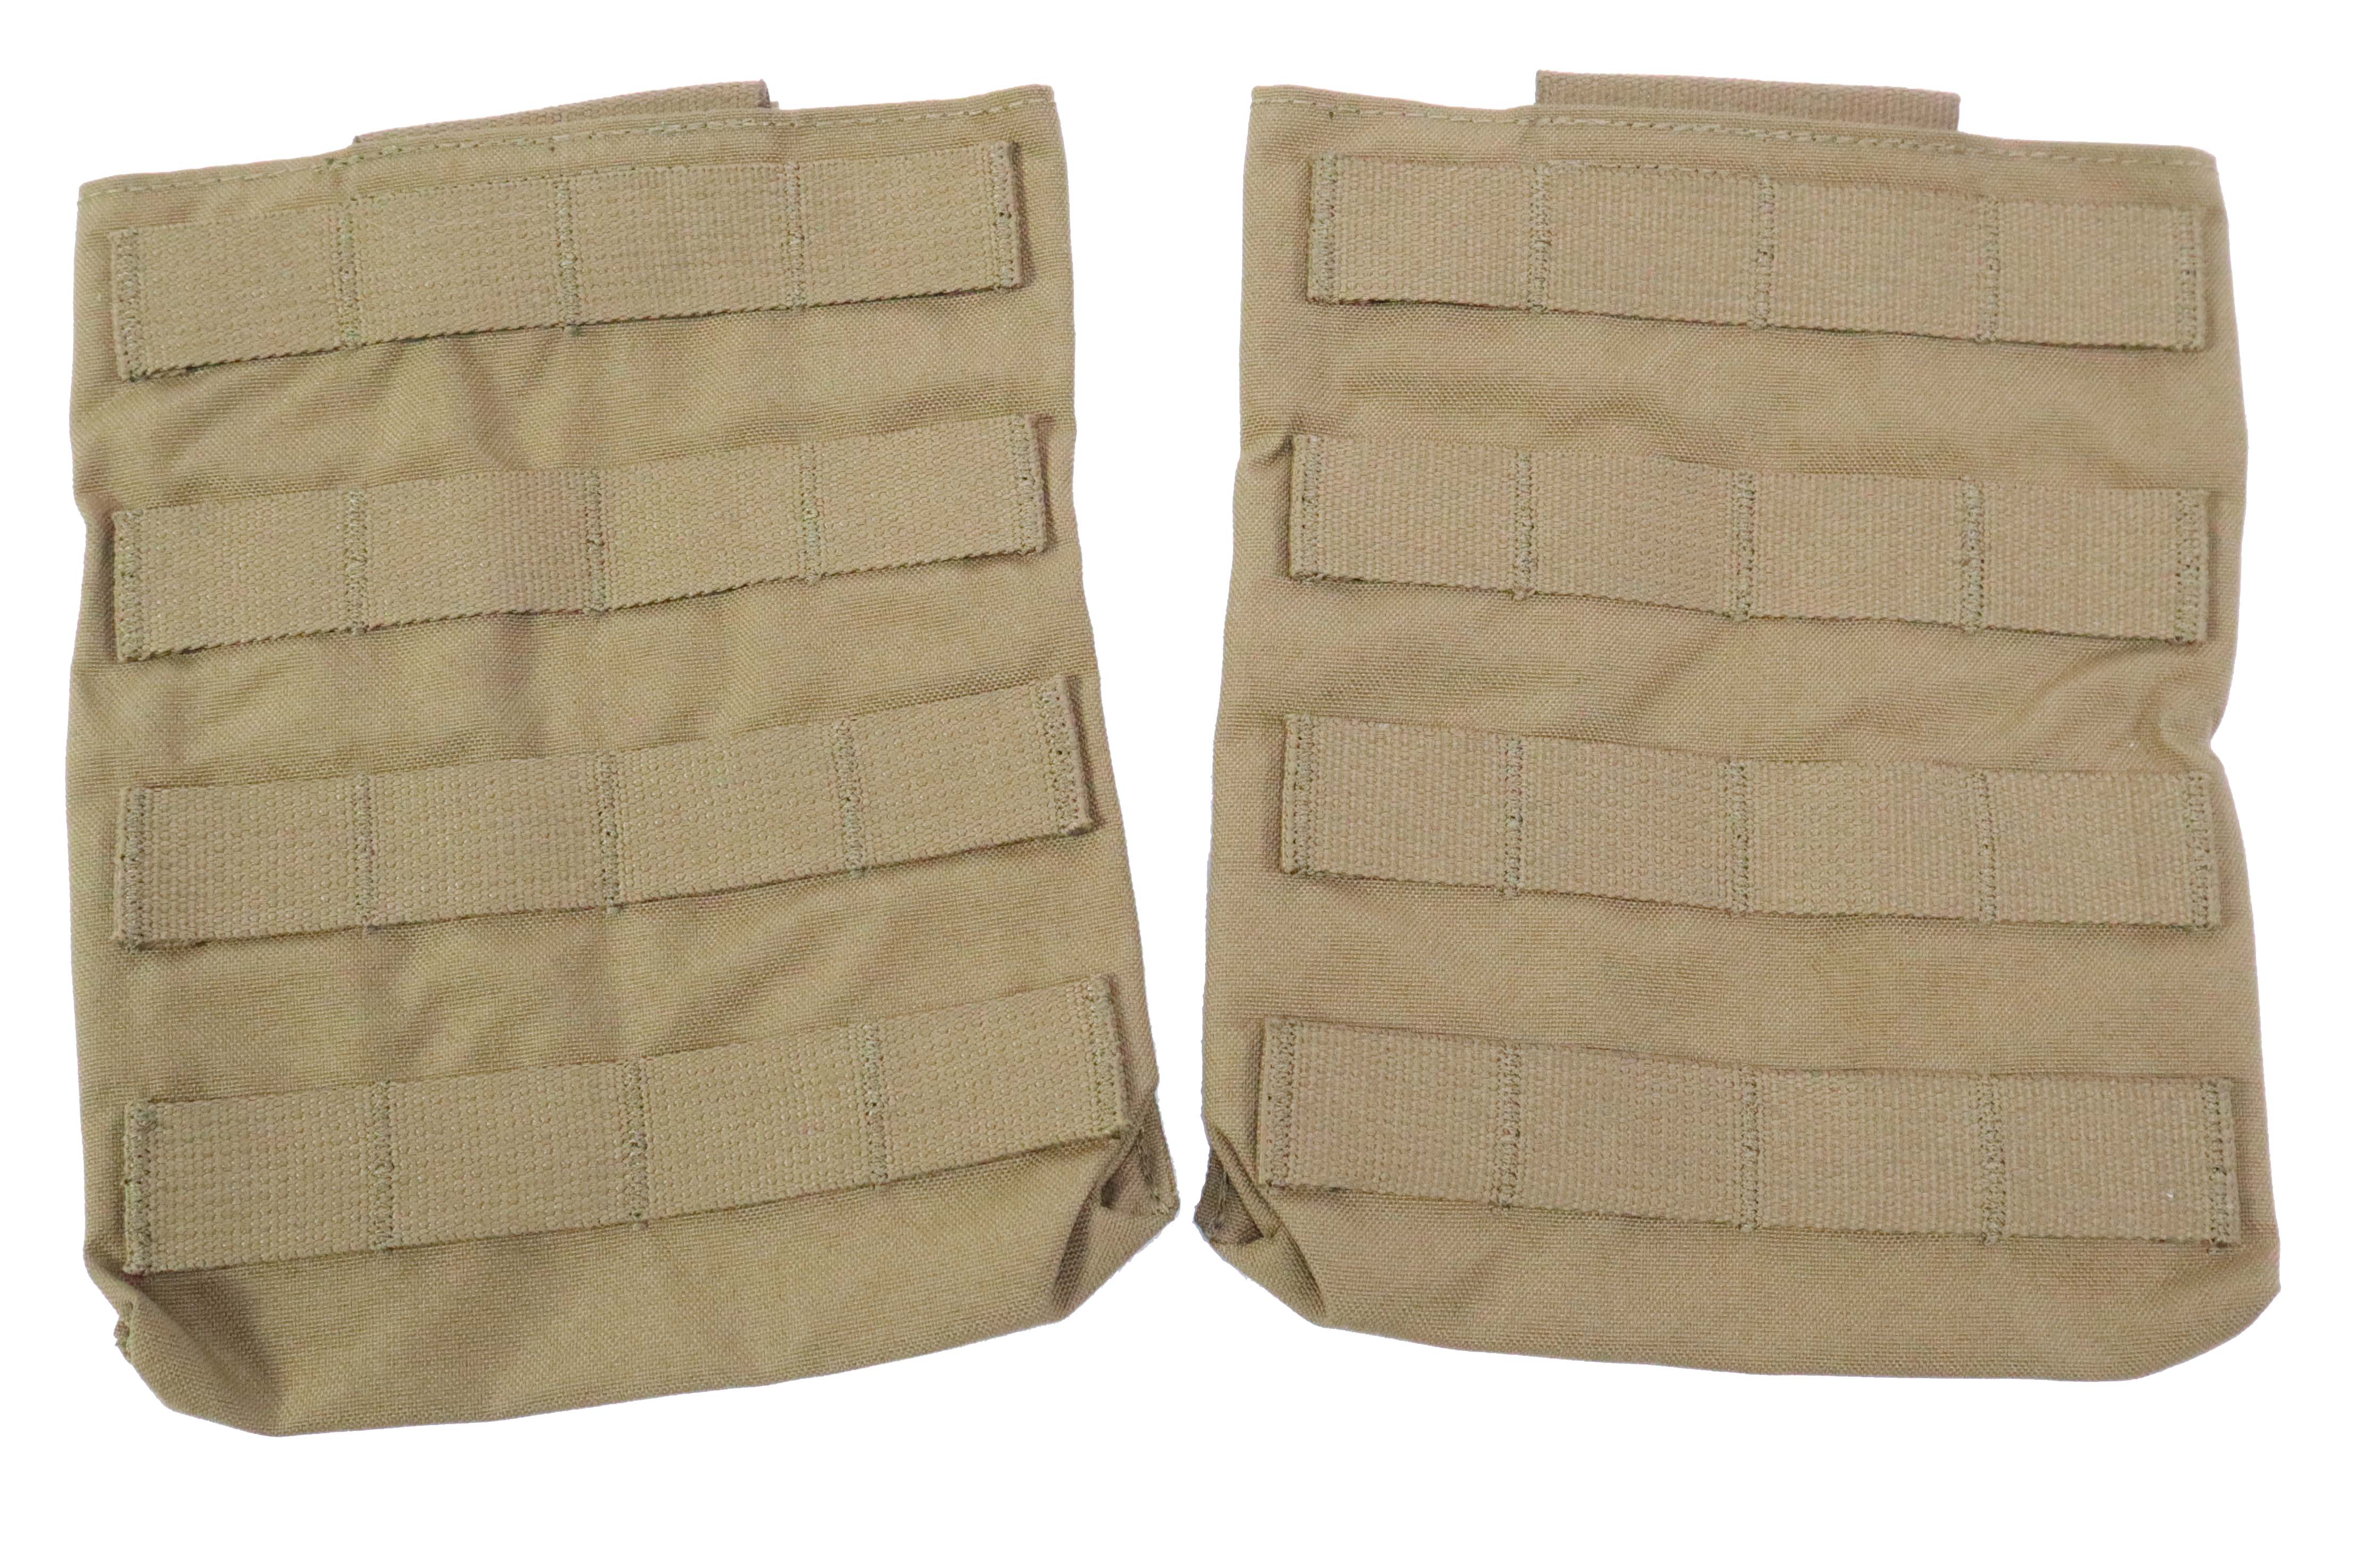 T3 Gear Side Armor Plate Pockets 6x8" Pouch – Offbase Supply Co.